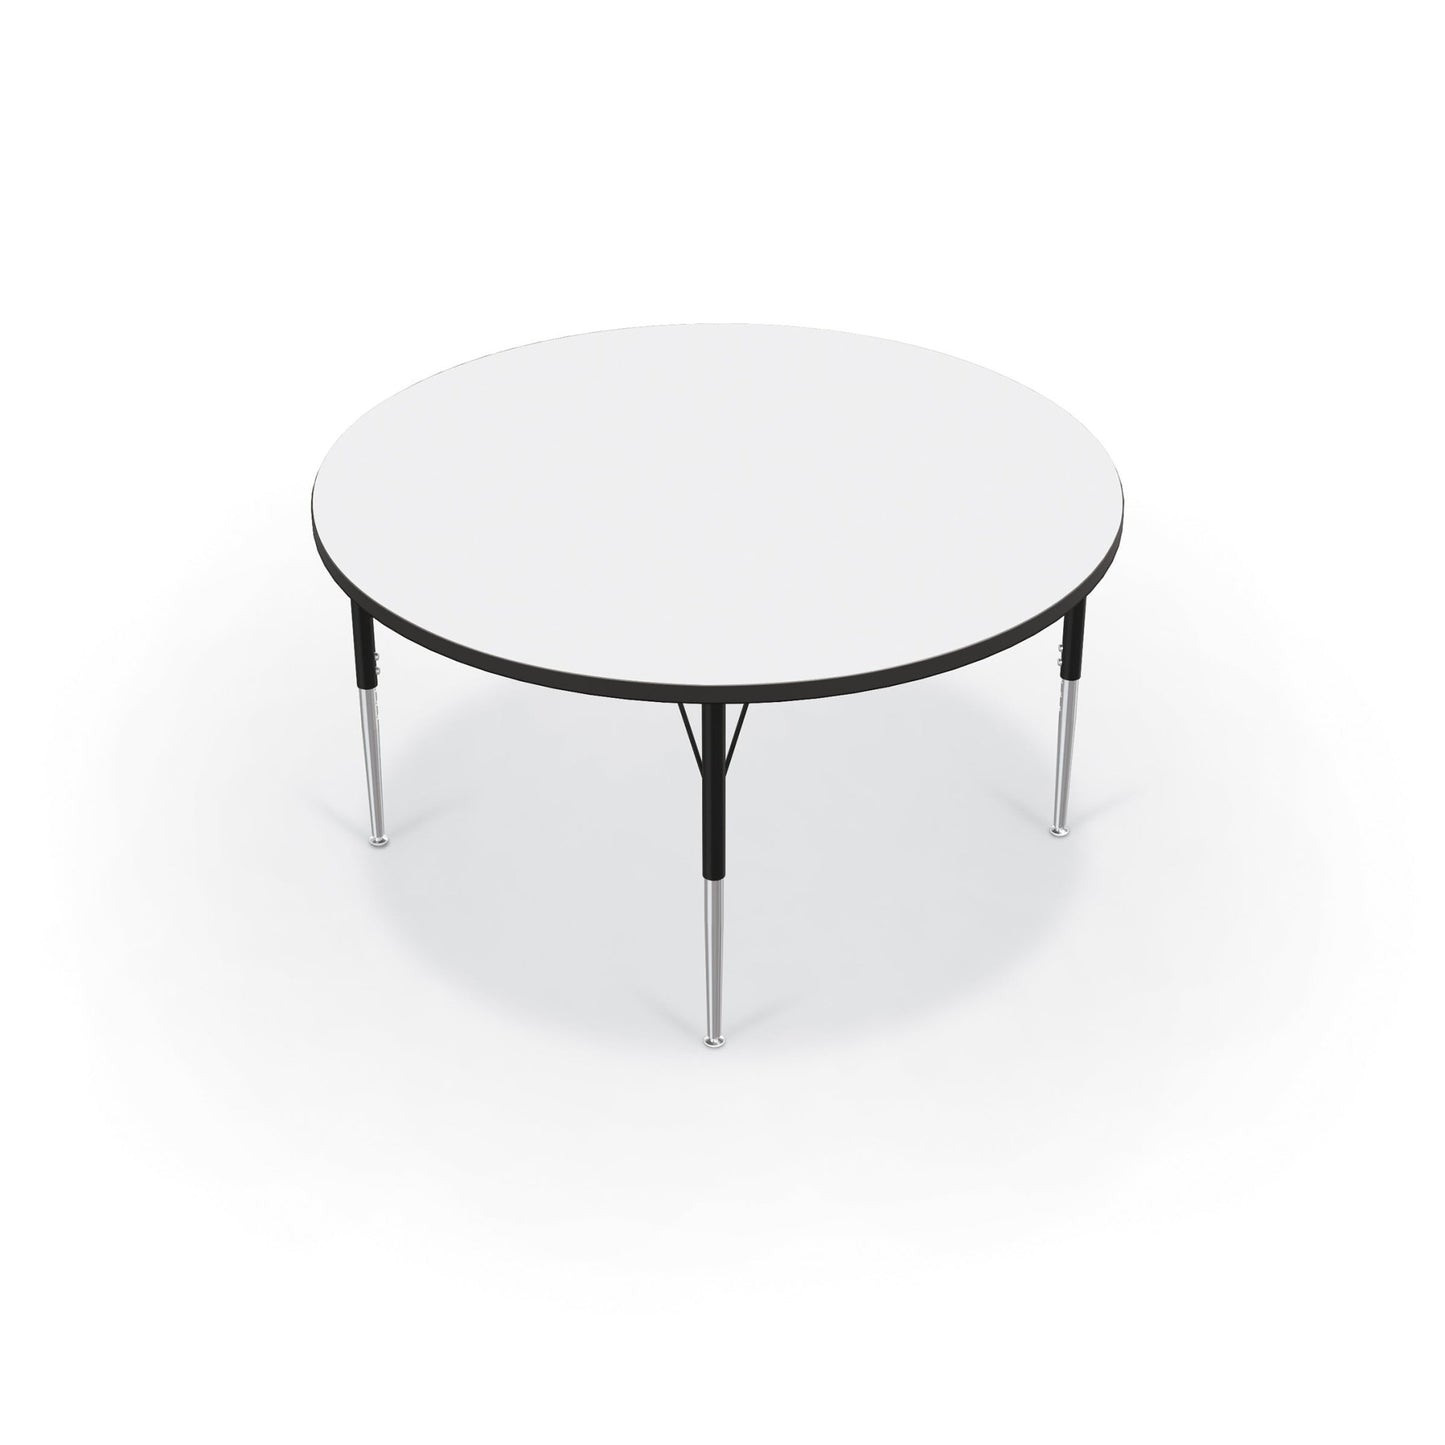 Mooreco Activity Table - 48" Round - Black Edgeband (Mooreco 90527-Q) - SchoolOutlet